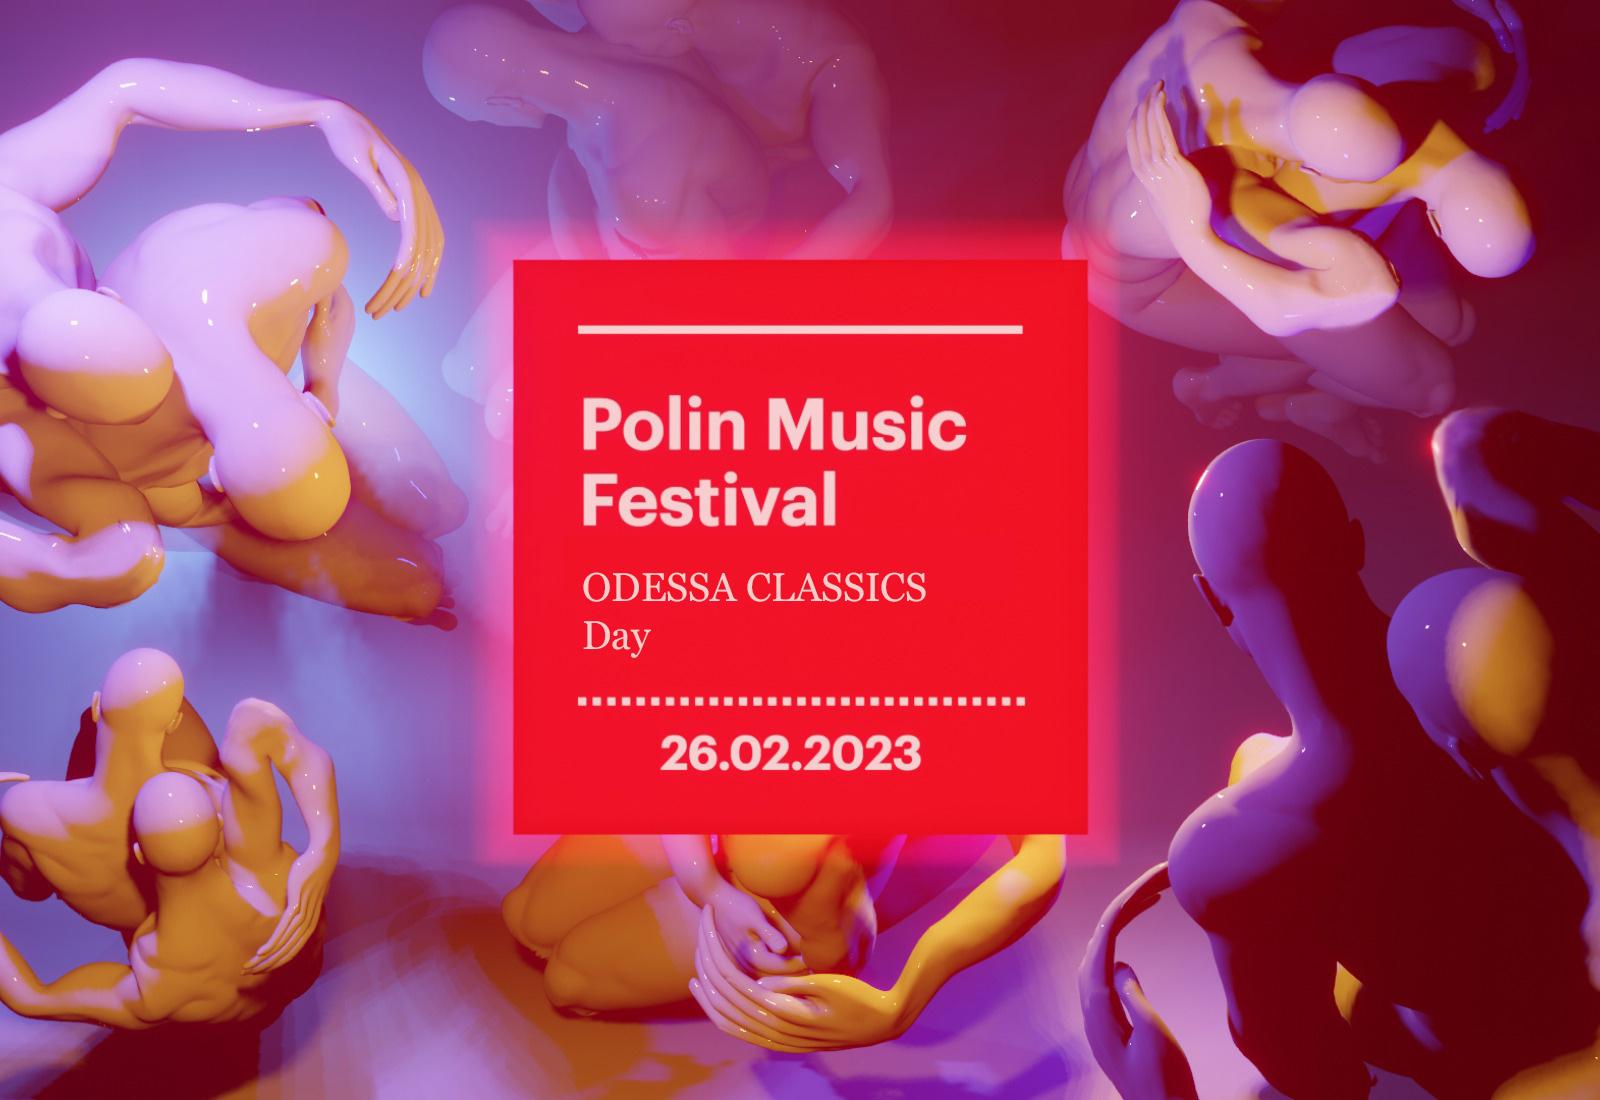 Polin Music Festival 2023, together with Odessa Classics, will present a unique programme